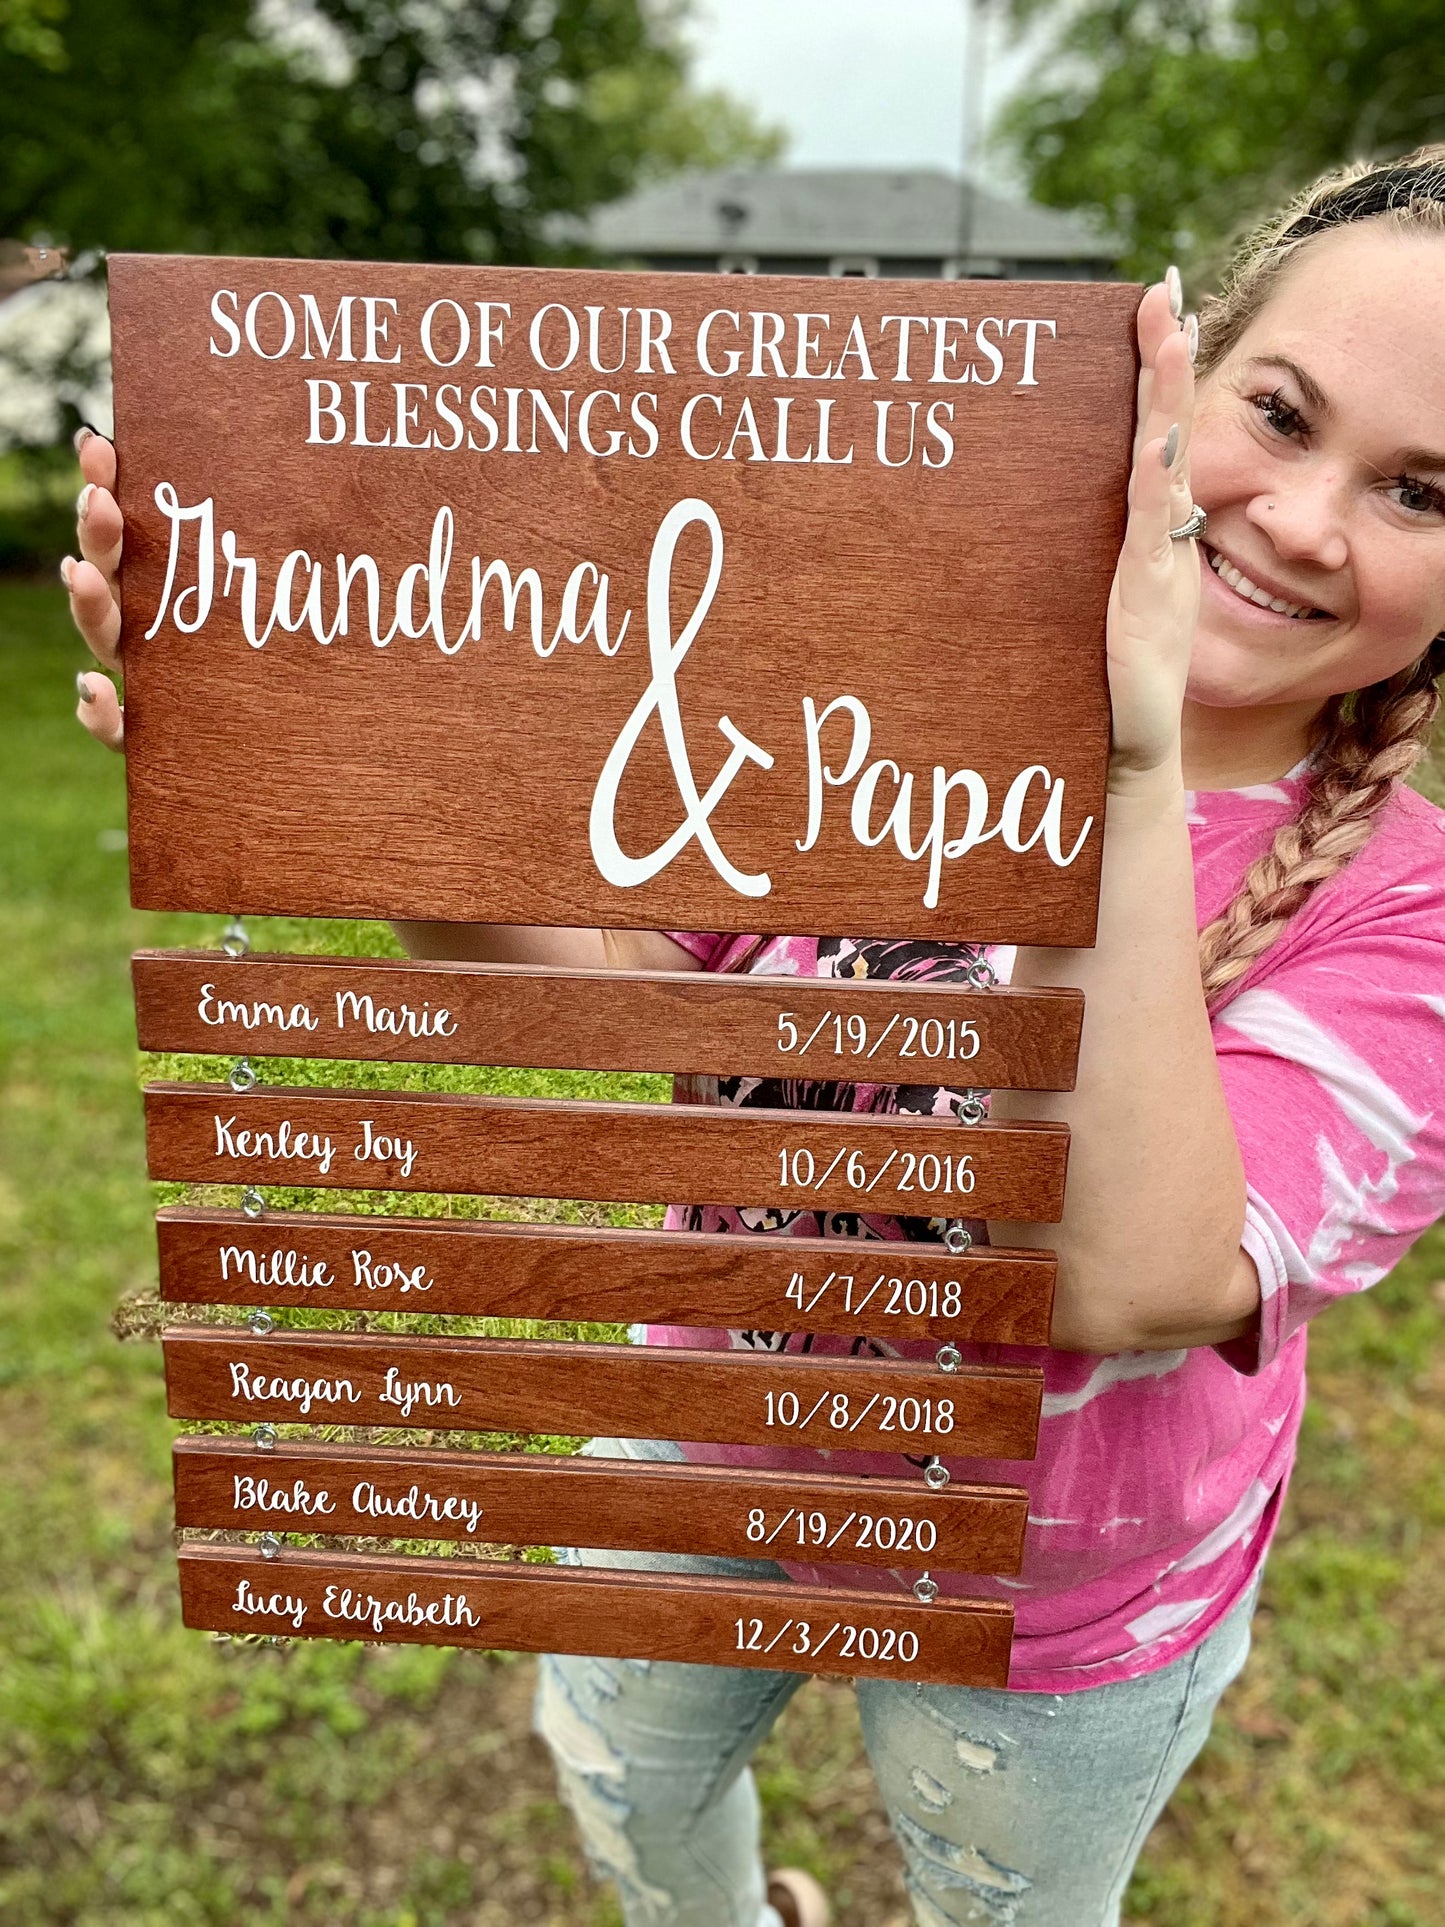 Our Greatest Blessings Call Us - Name Plates - Custom Sign